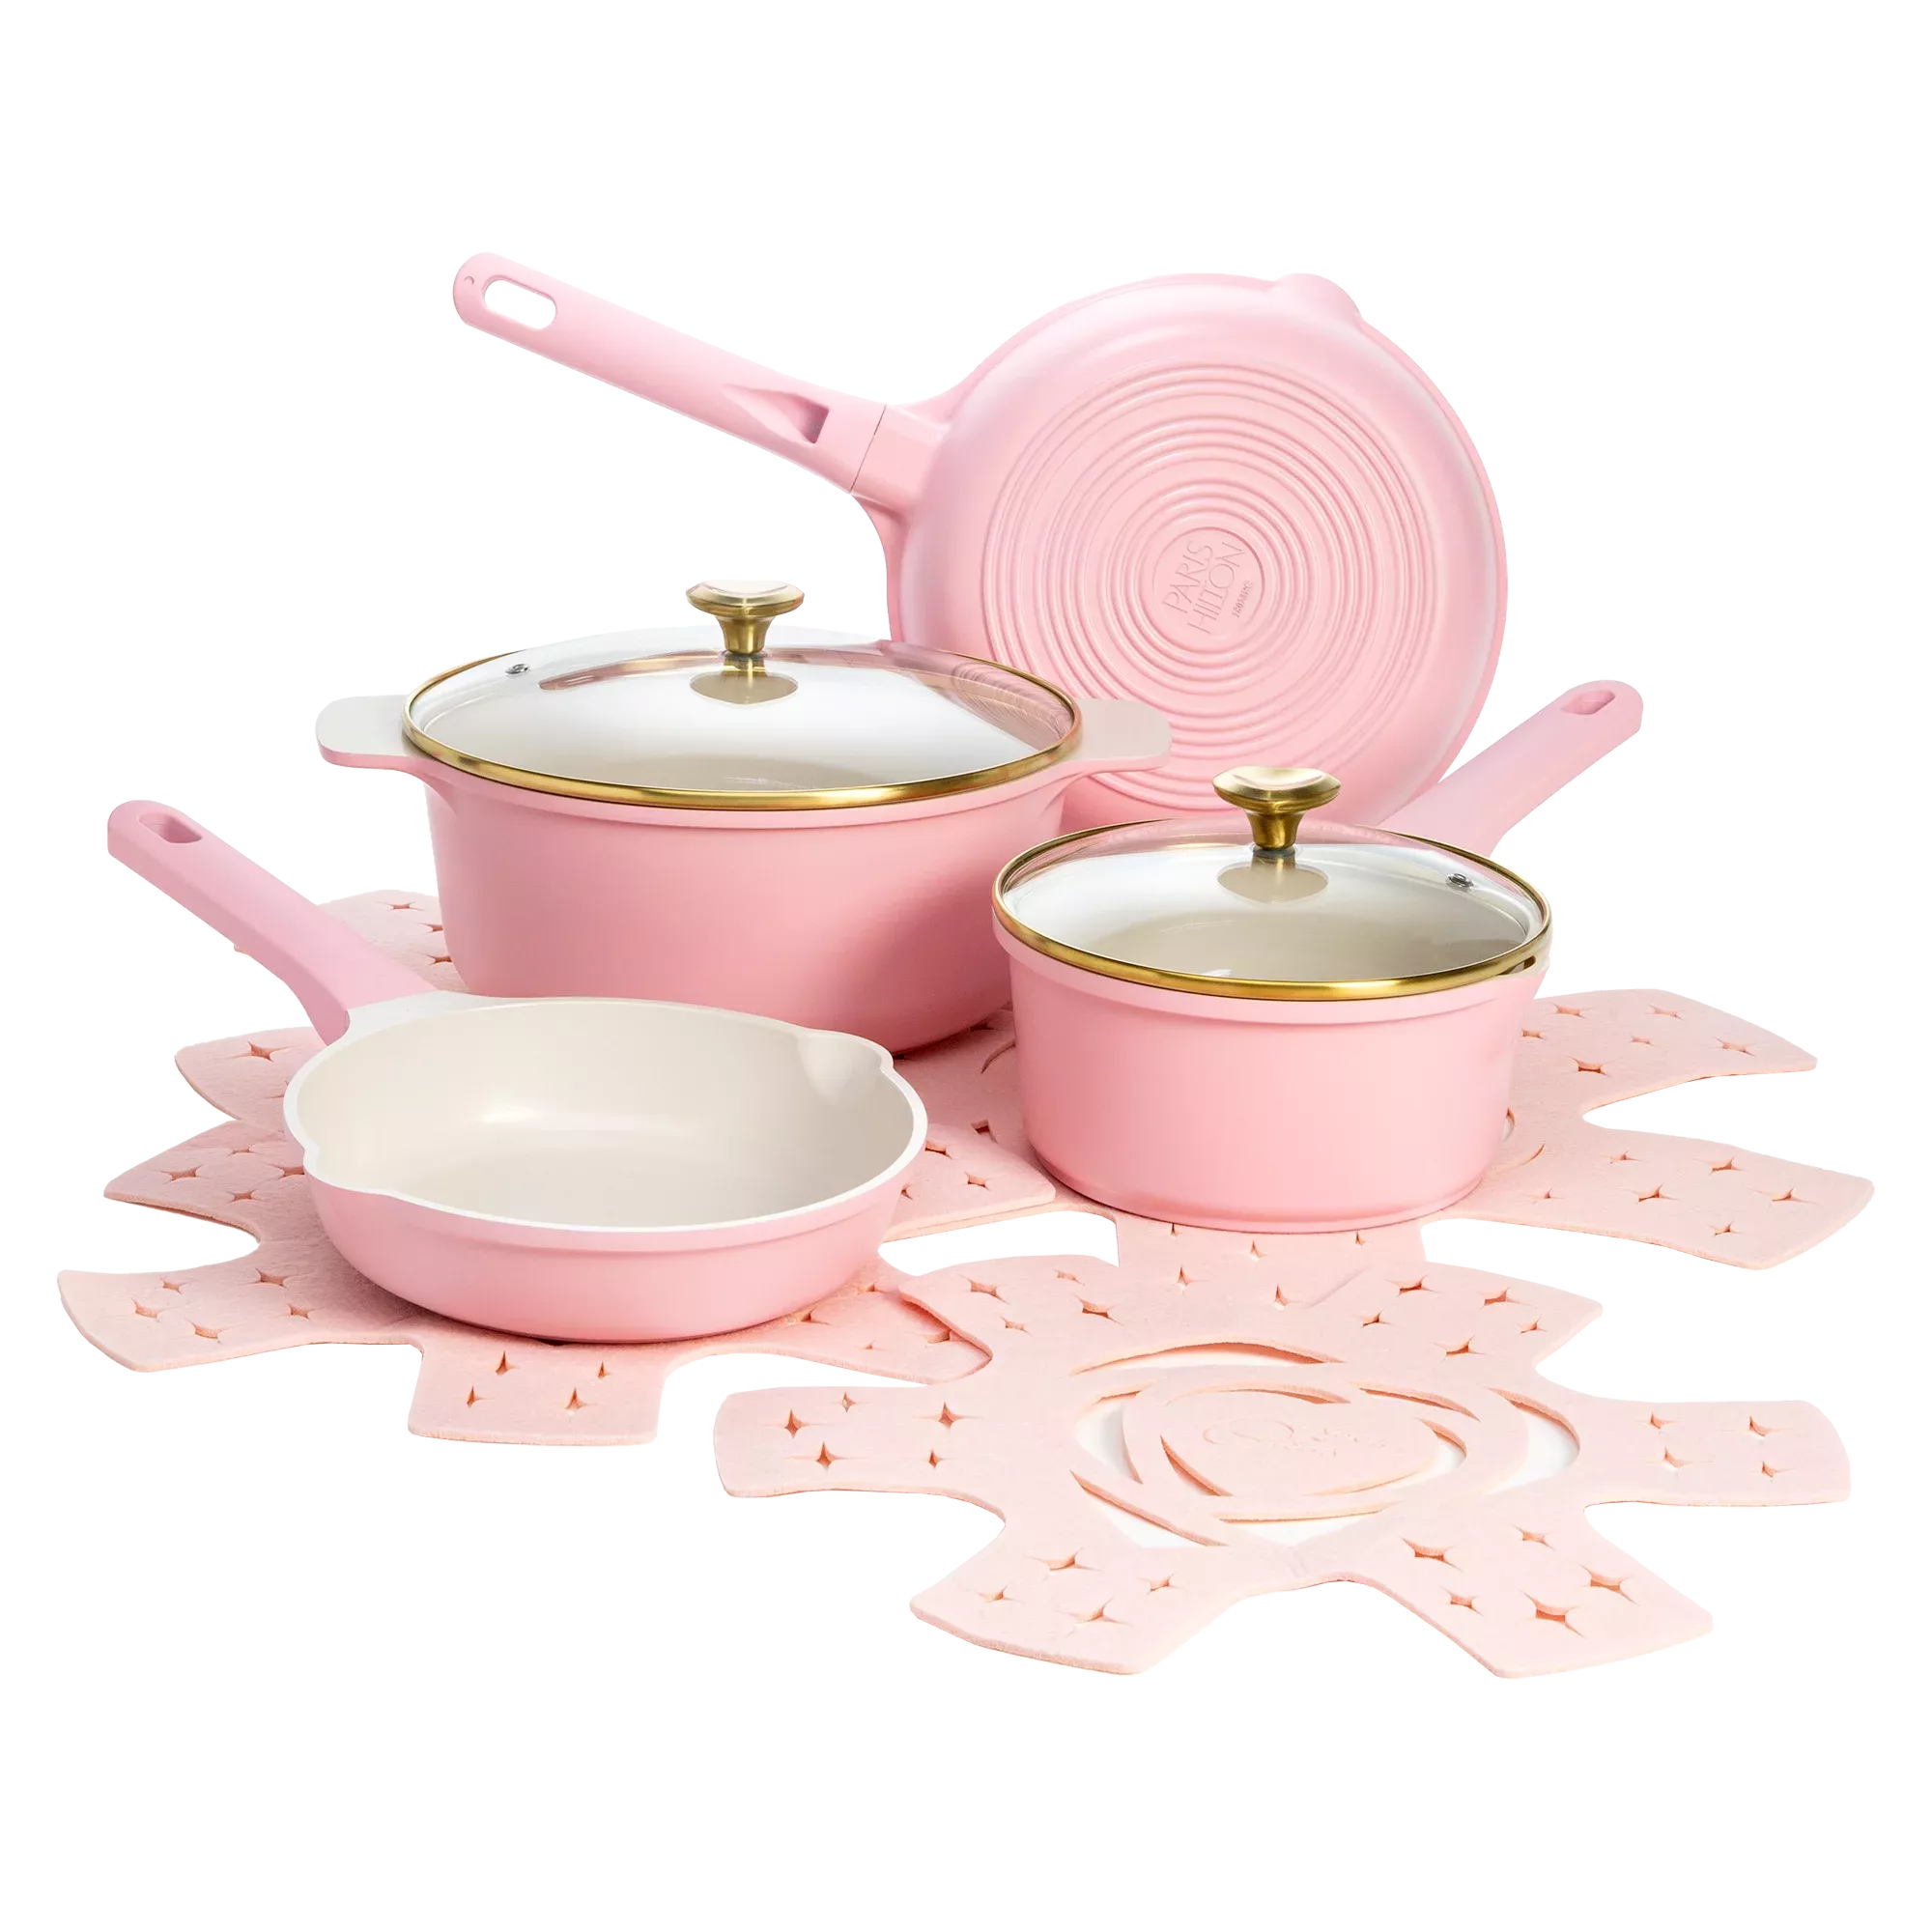 Paris Hilton 7-Piece Cooking Utensils Set, Silicone and Stainless Steel,  Pink 